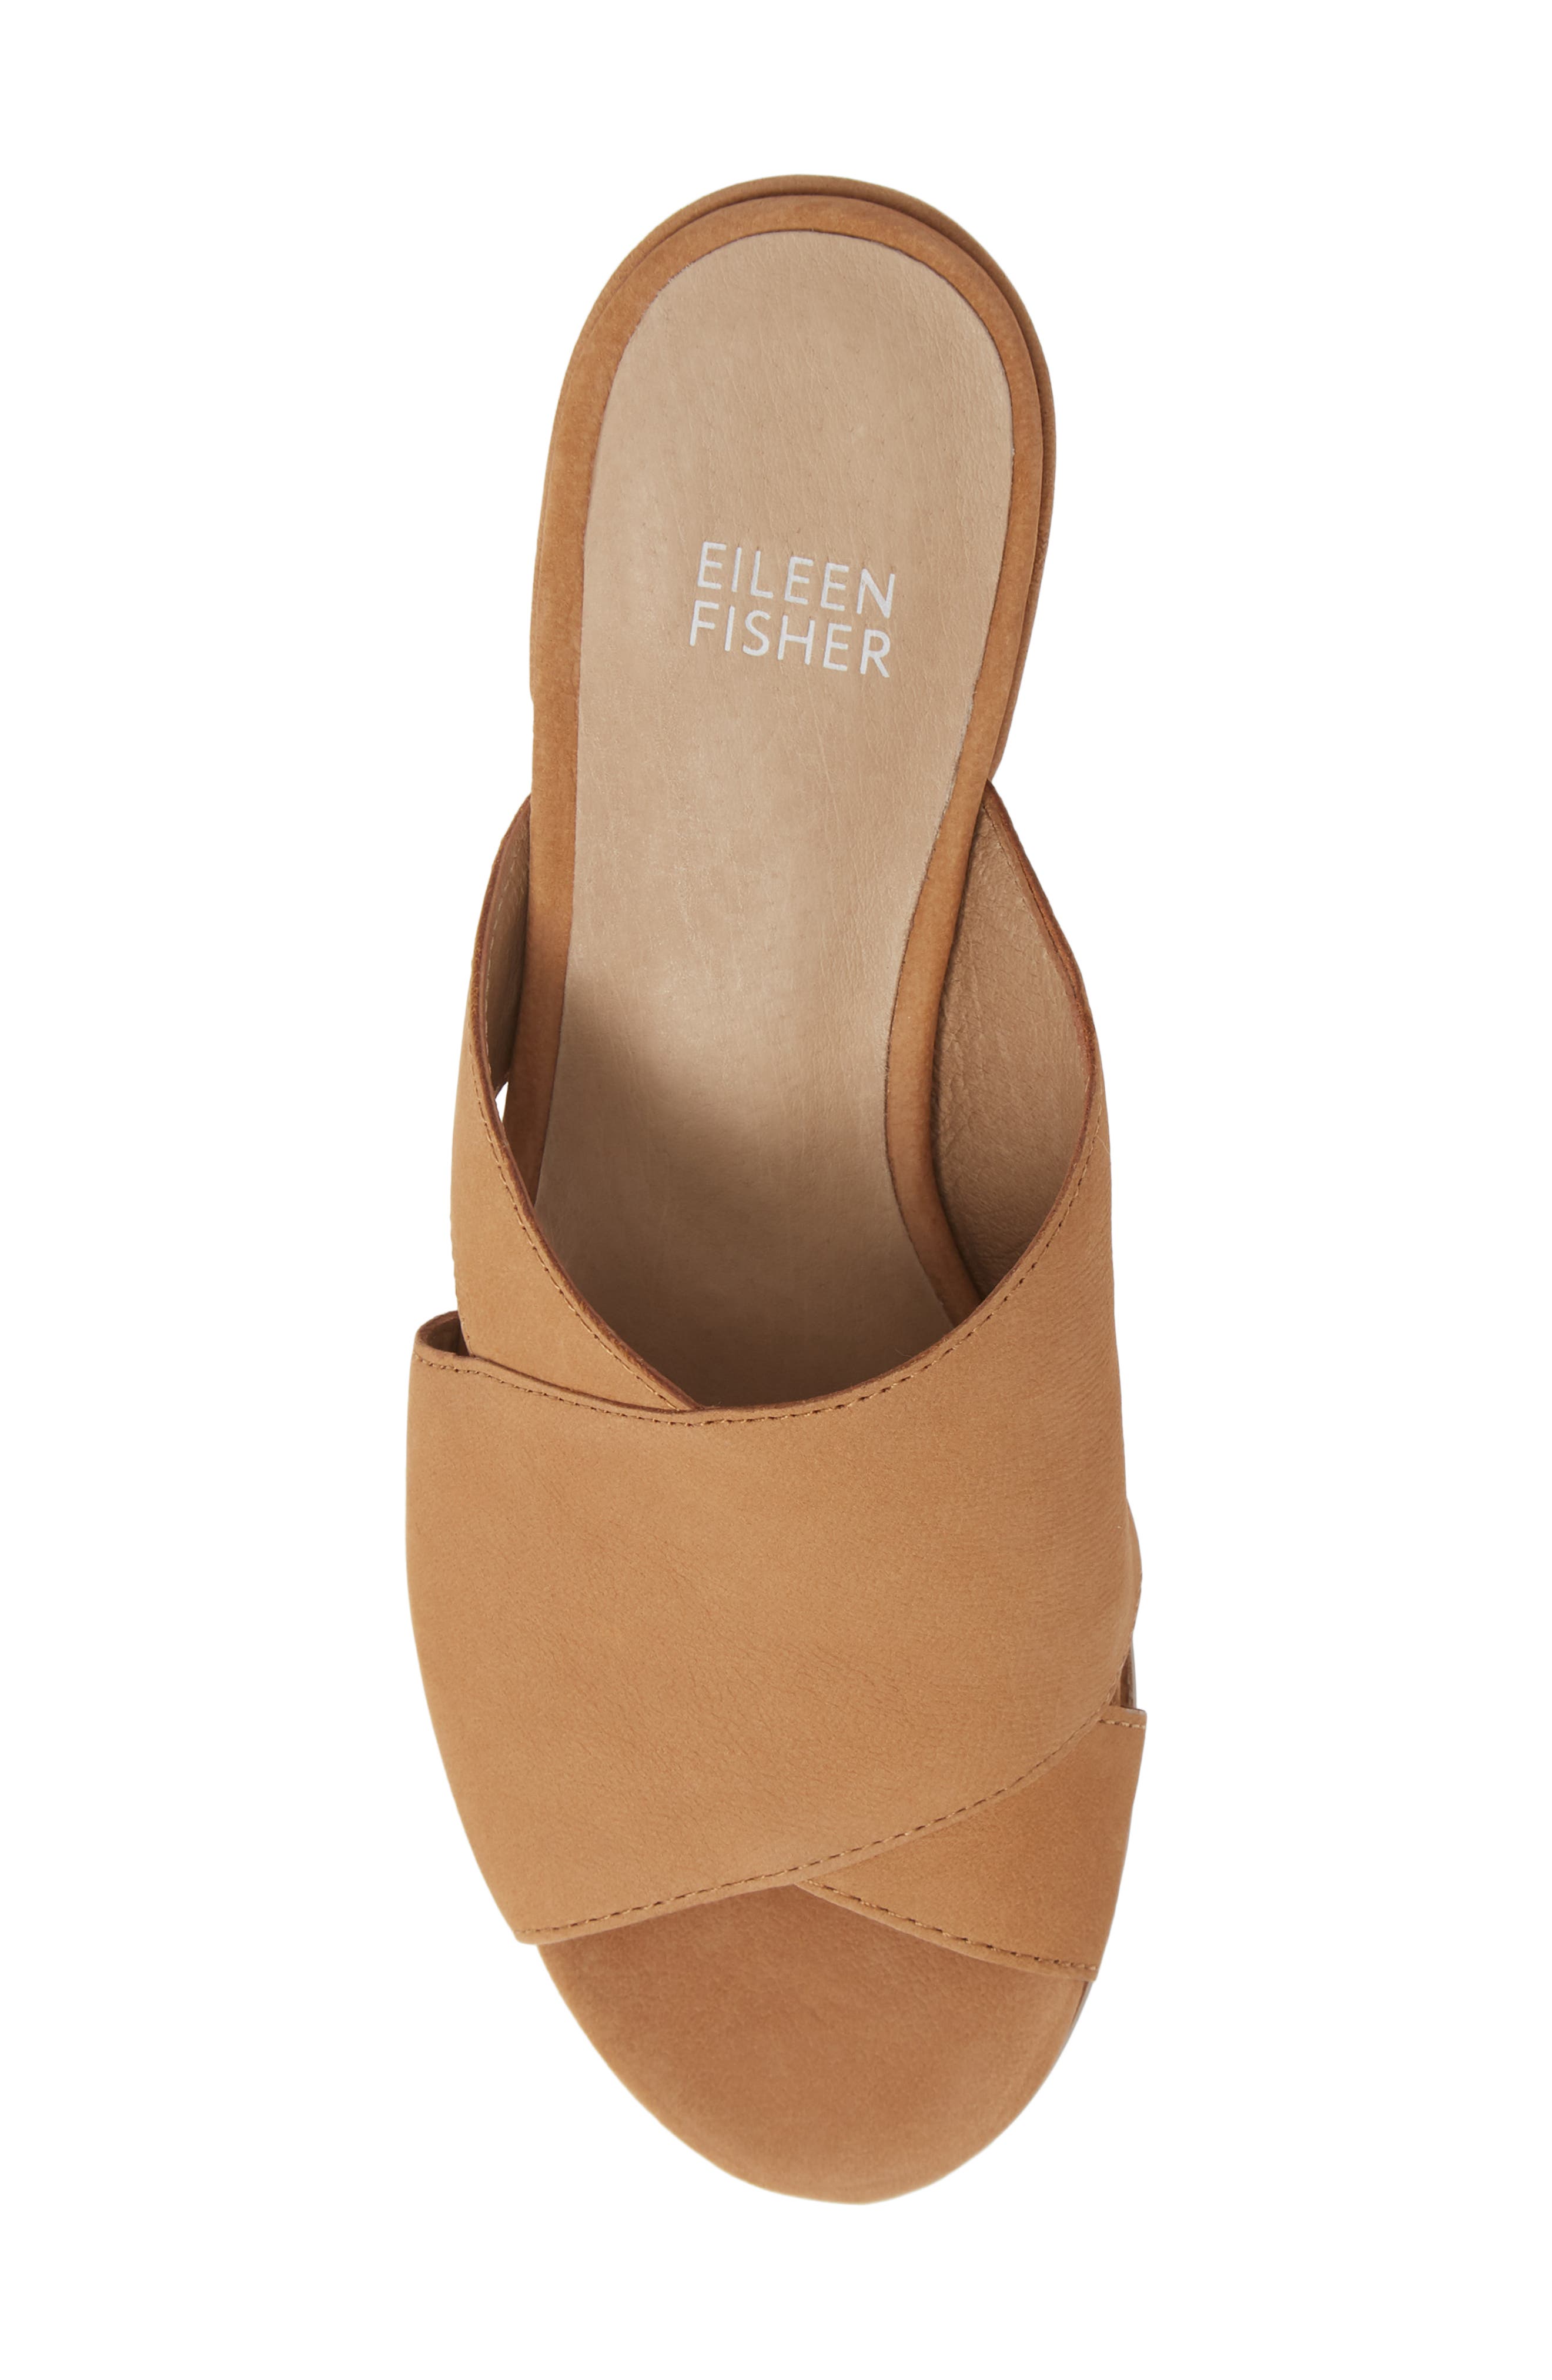 eileen fisher haven mules